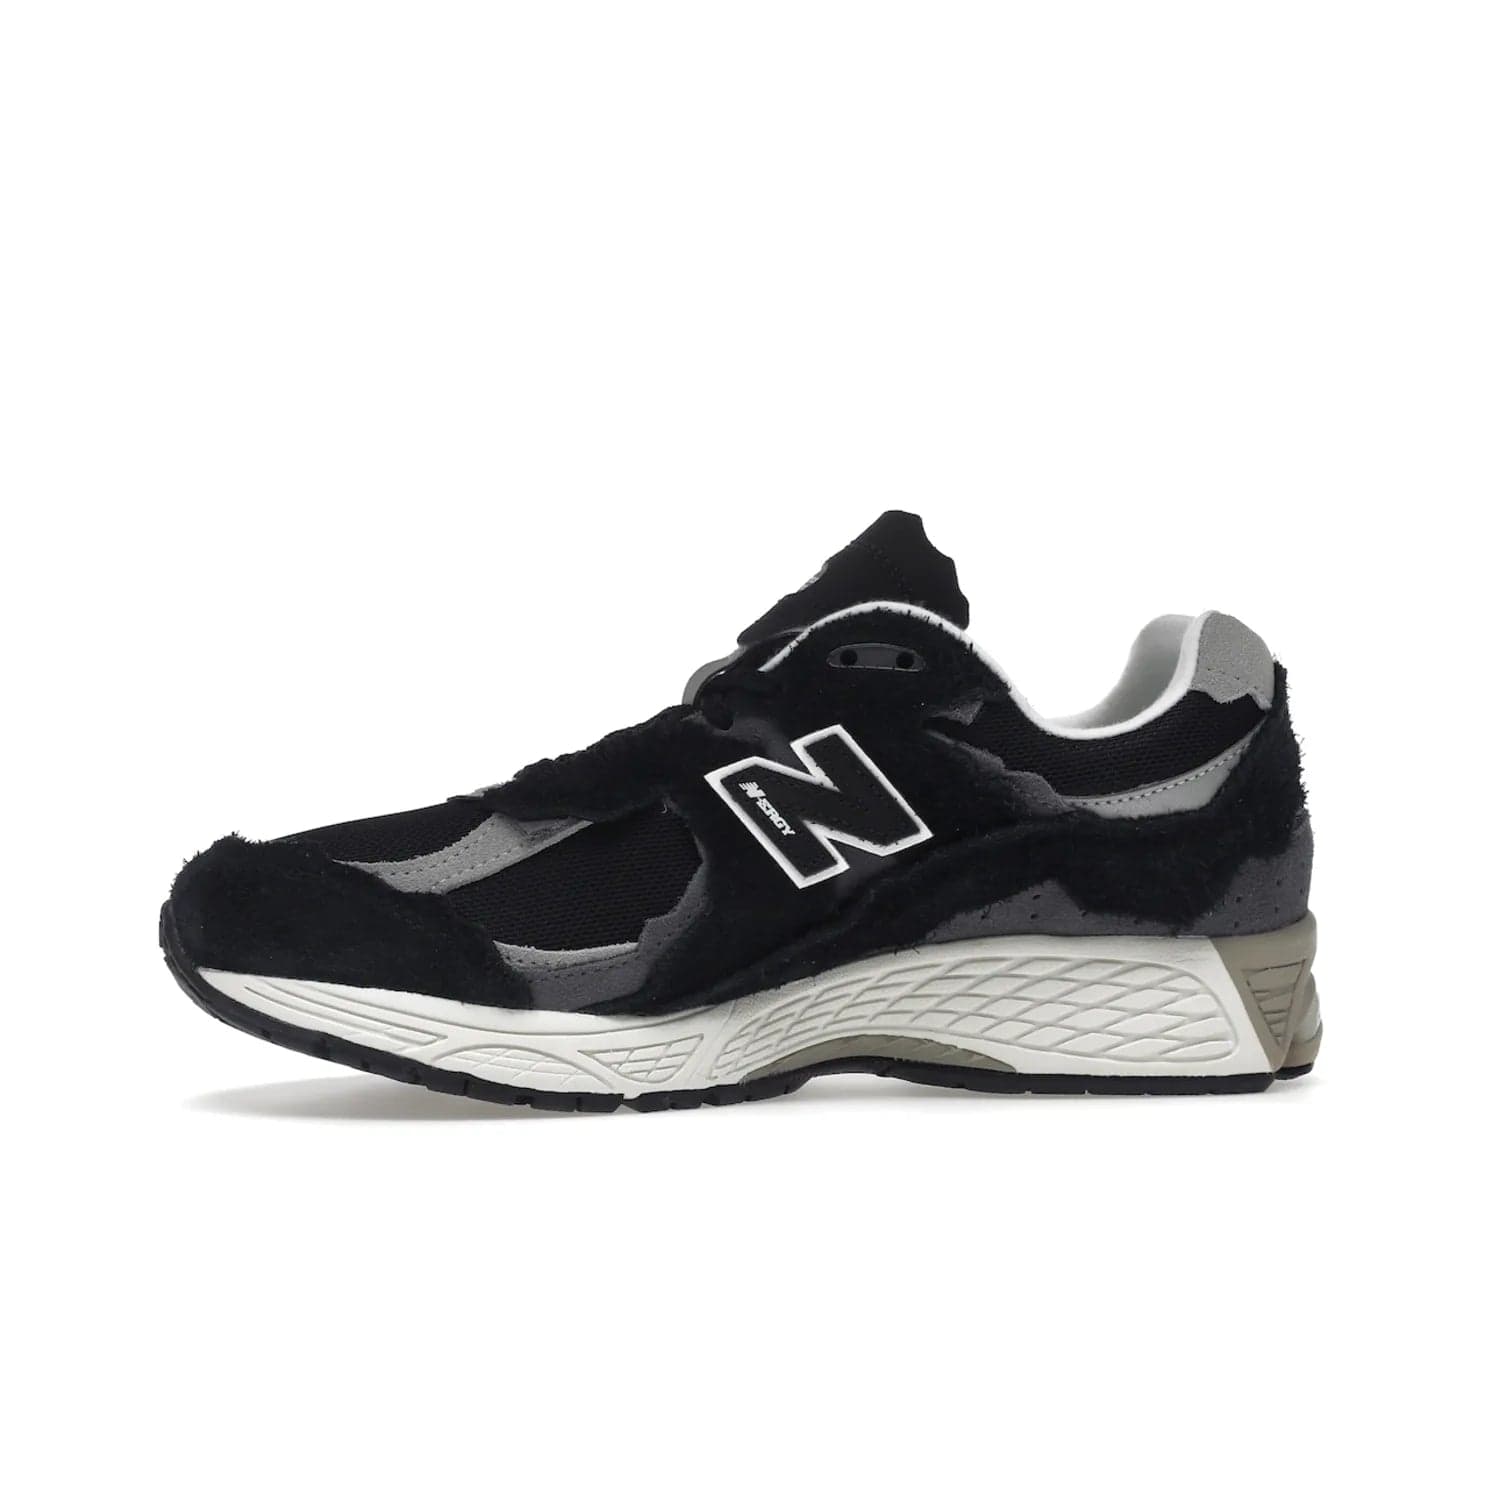 New Balance 2002R Protection Pack Black Grey - Image 18 - Only at www.BallersClubKickz.com - Look stylish in the New Balance 2002R Protection Pack Black Grey. Uppers constructed from premium materials like mesh and synthetic overlays. Iconic "N" emblem appears in white and black. ABZORB midsole for shock absorption and responsiveness. Black outsole for grip and traction. Lacing system offers customized fit and cushioned tongue and collar offer comfort and stability. Step up your style with this must-hav